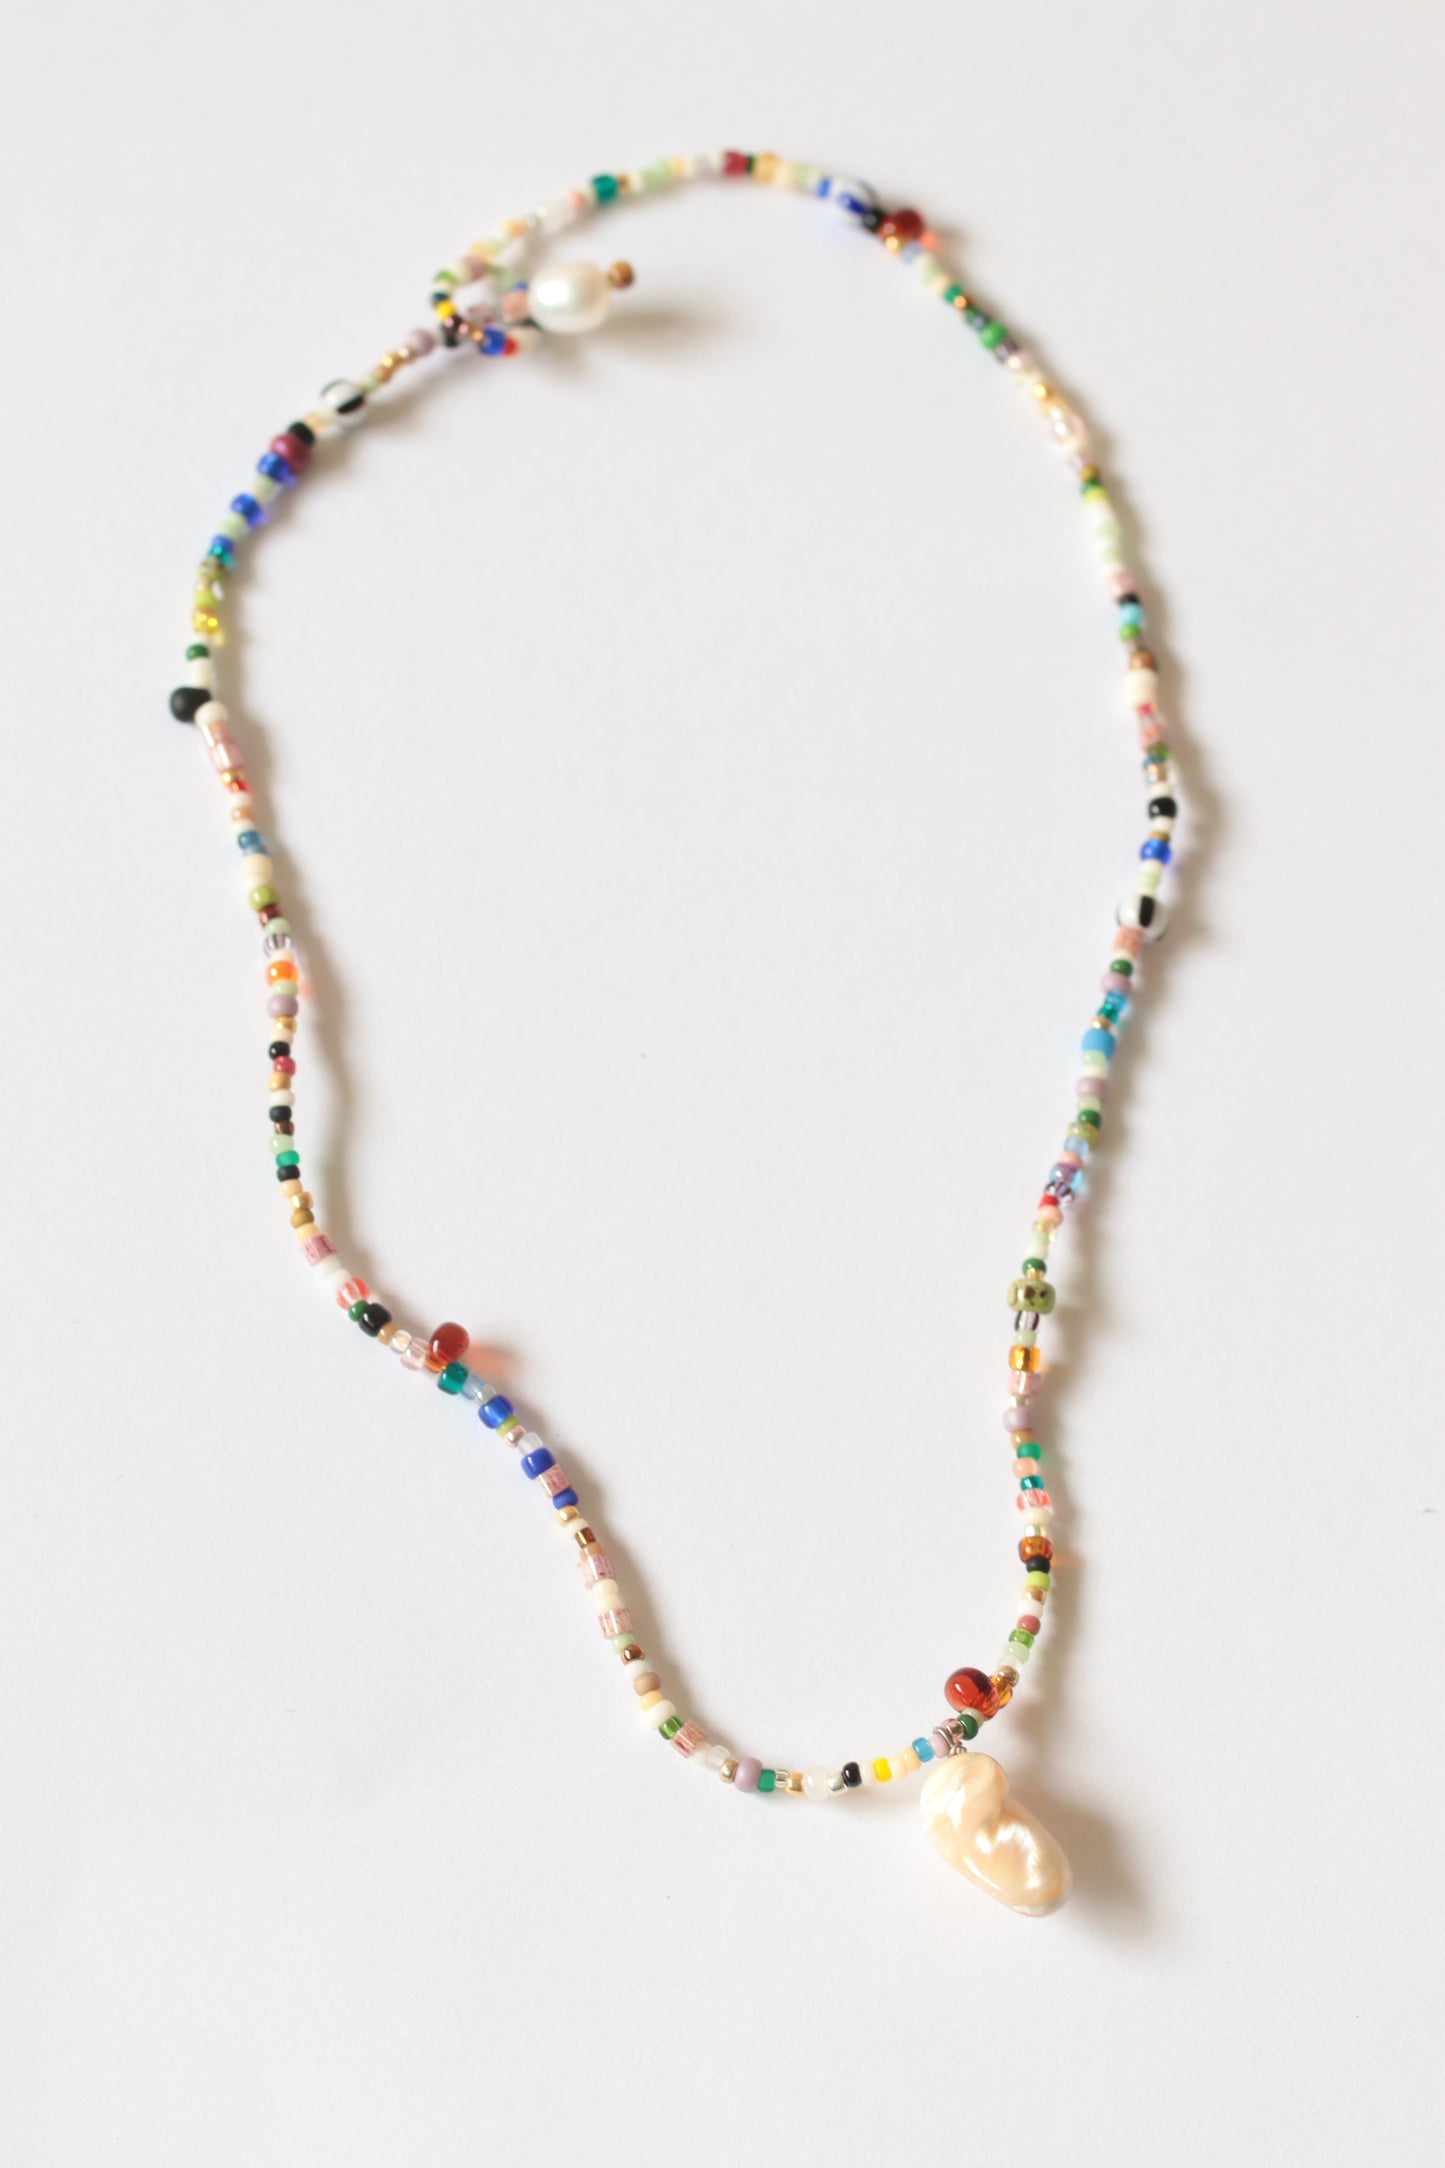 PEARL BEADS NECKLACE